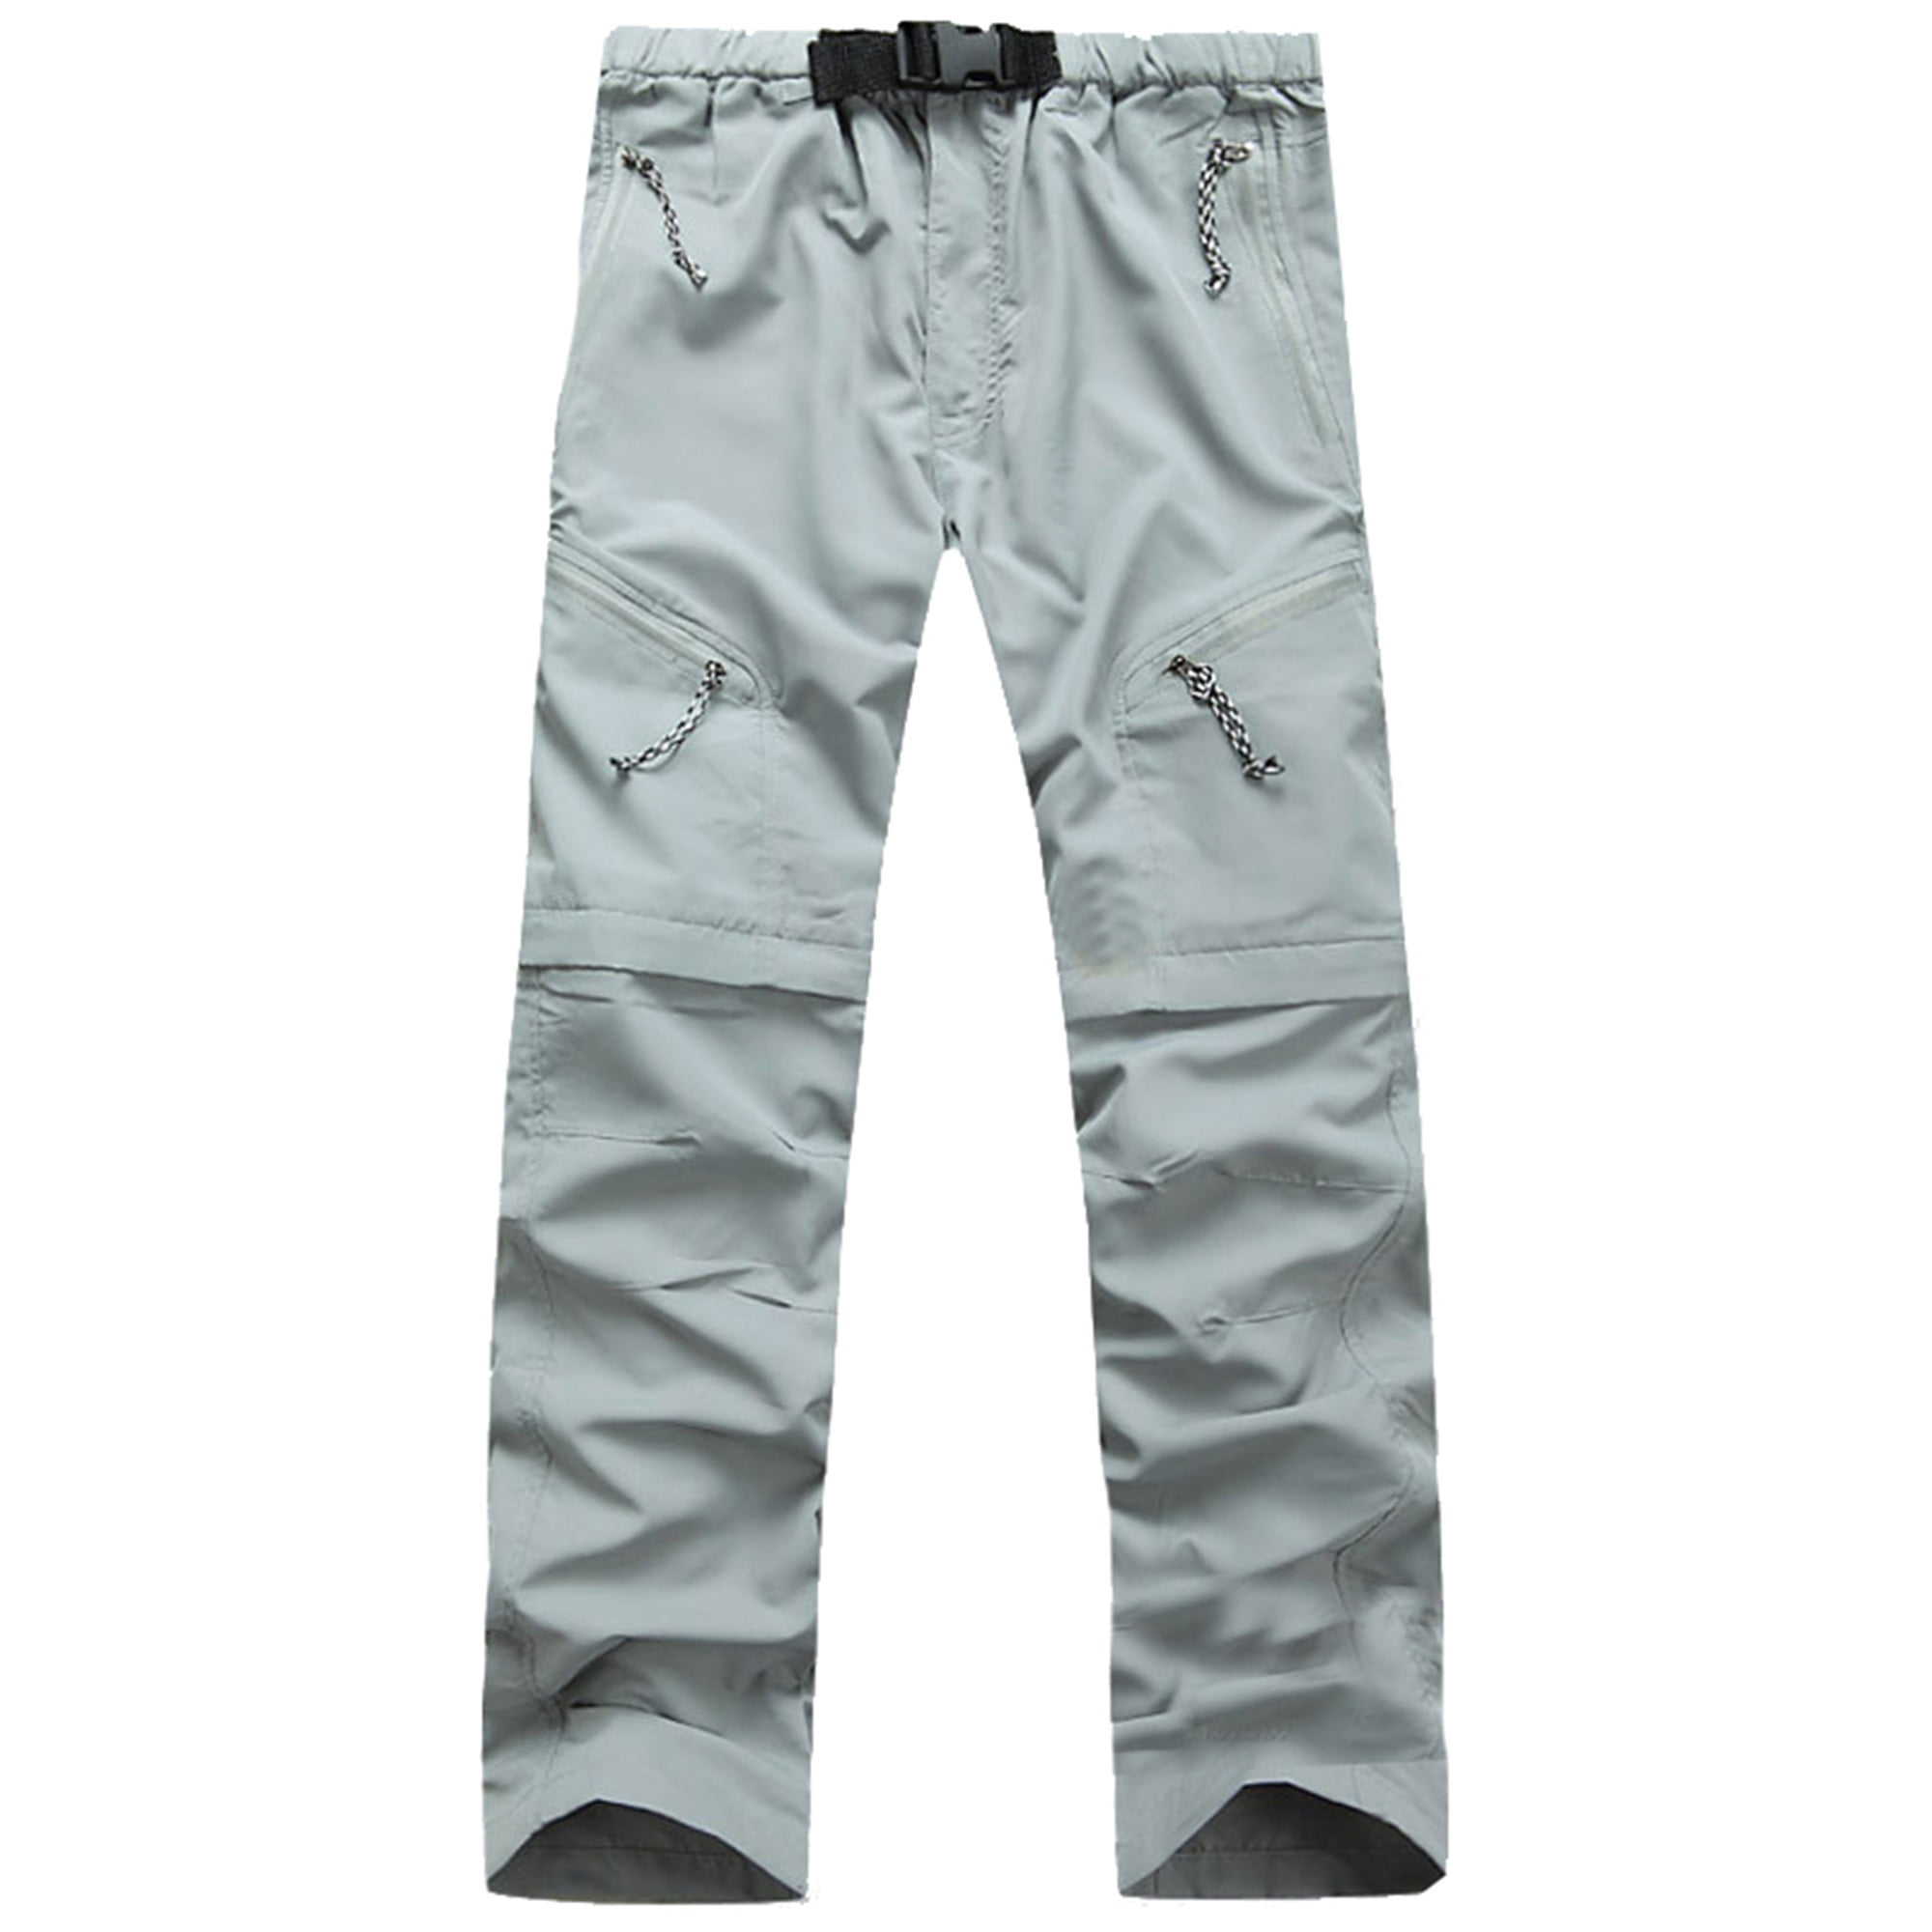 Details about   Men Hiking Pants Quick Dry Outdoor Combat Sports Waterproof Baggy Thin Trousers